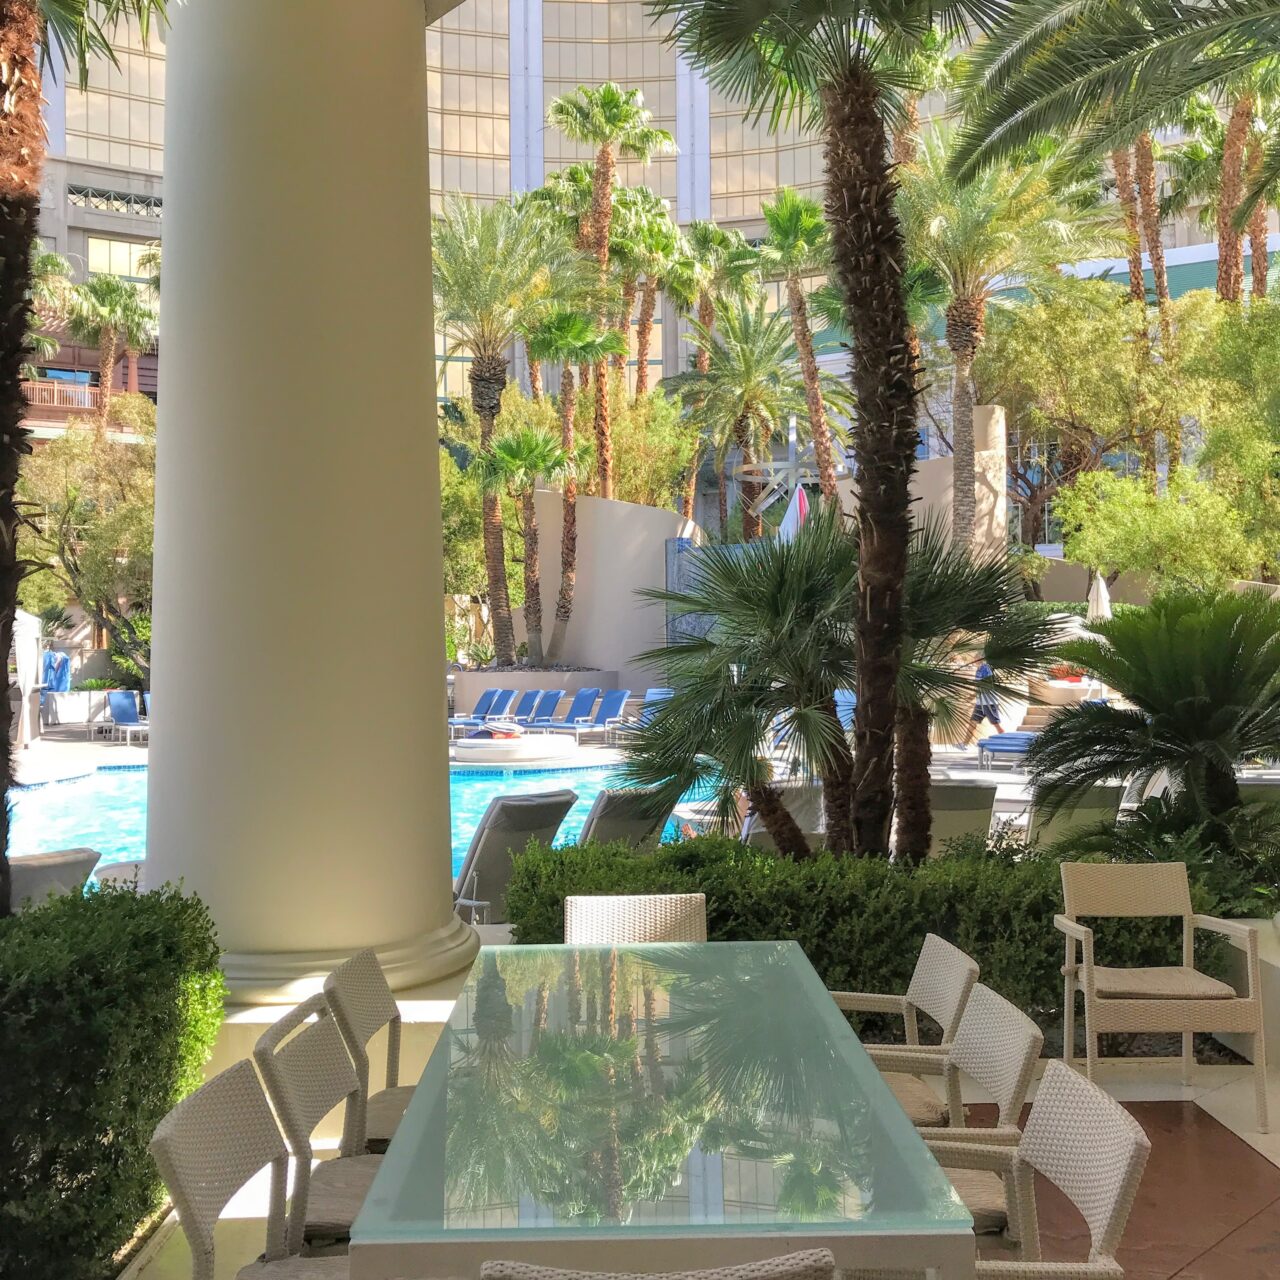 Four Seasons hotel Las Vegas review - Turning left for less